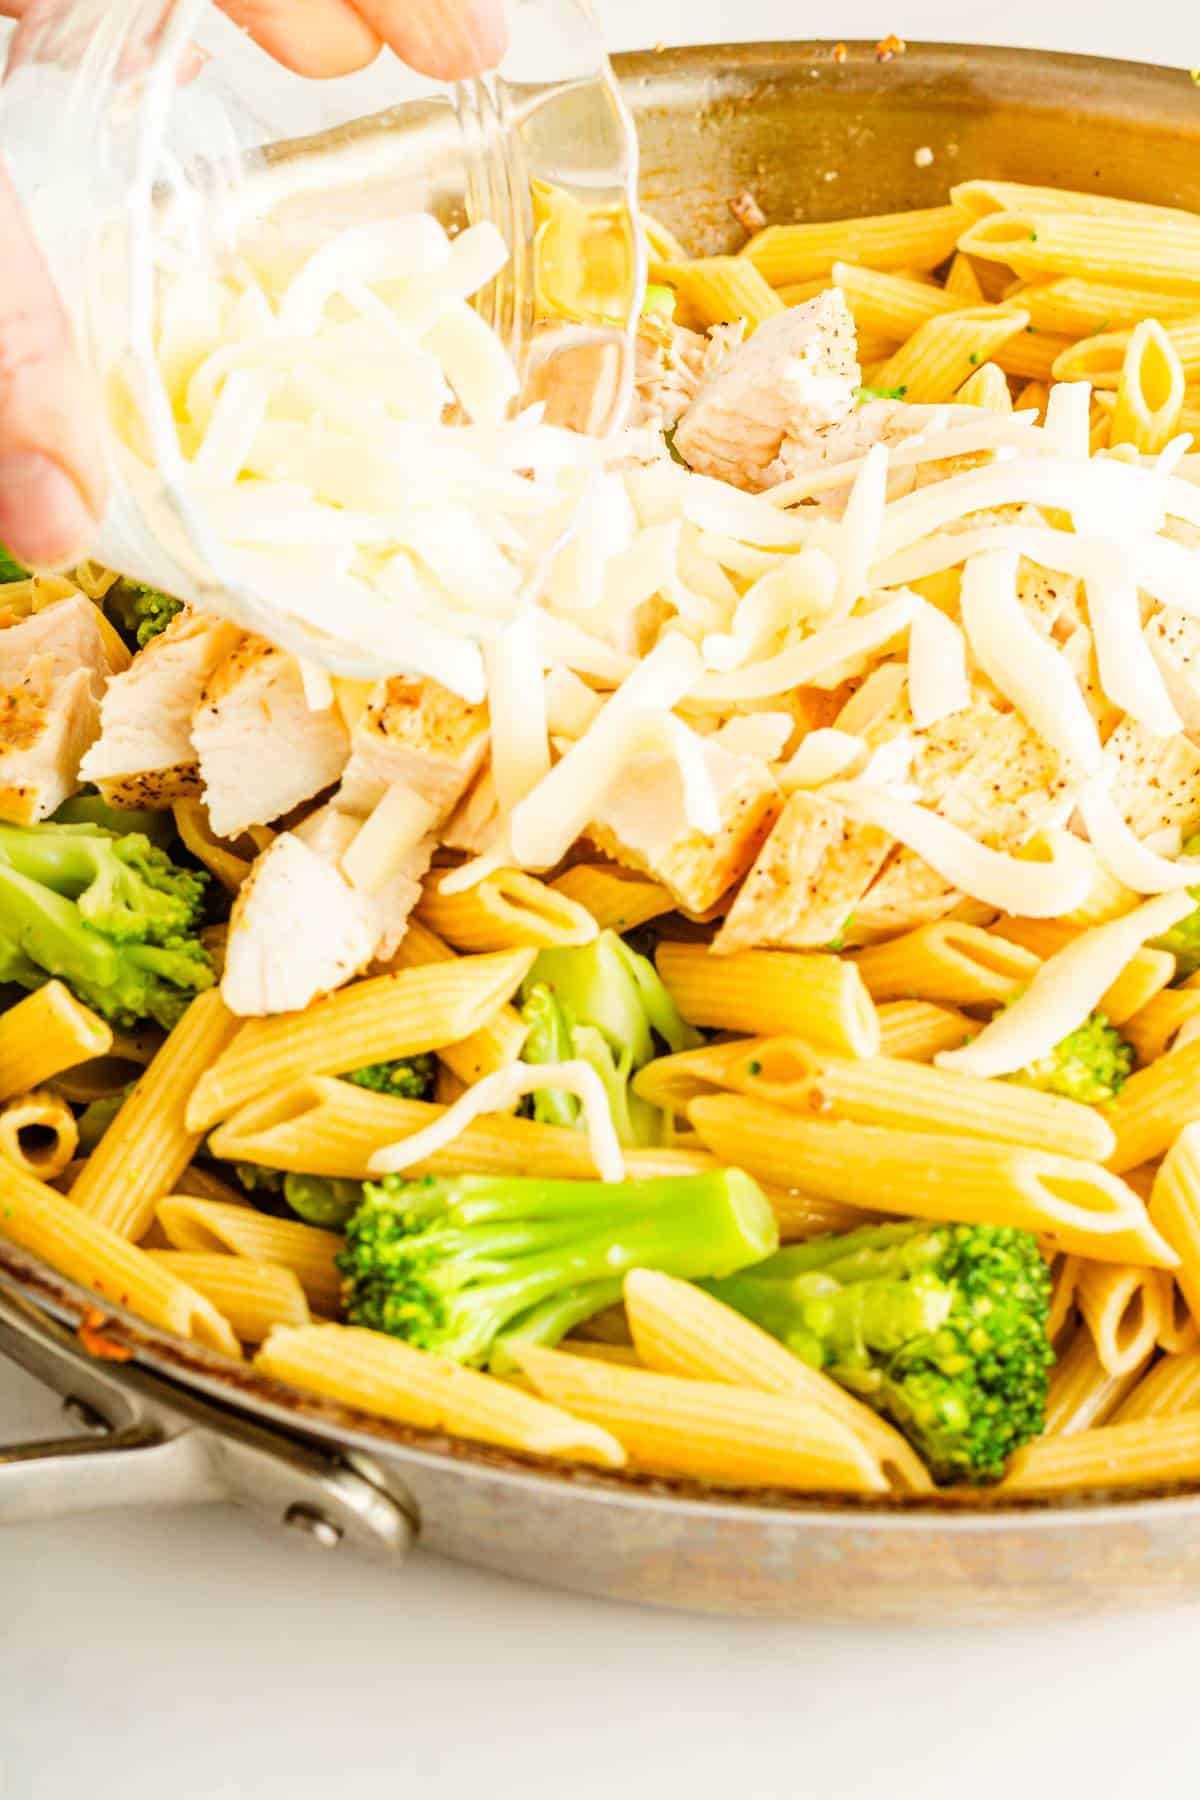 Mozzarella being put on top of penne pasta dish with chicken and broccoli.